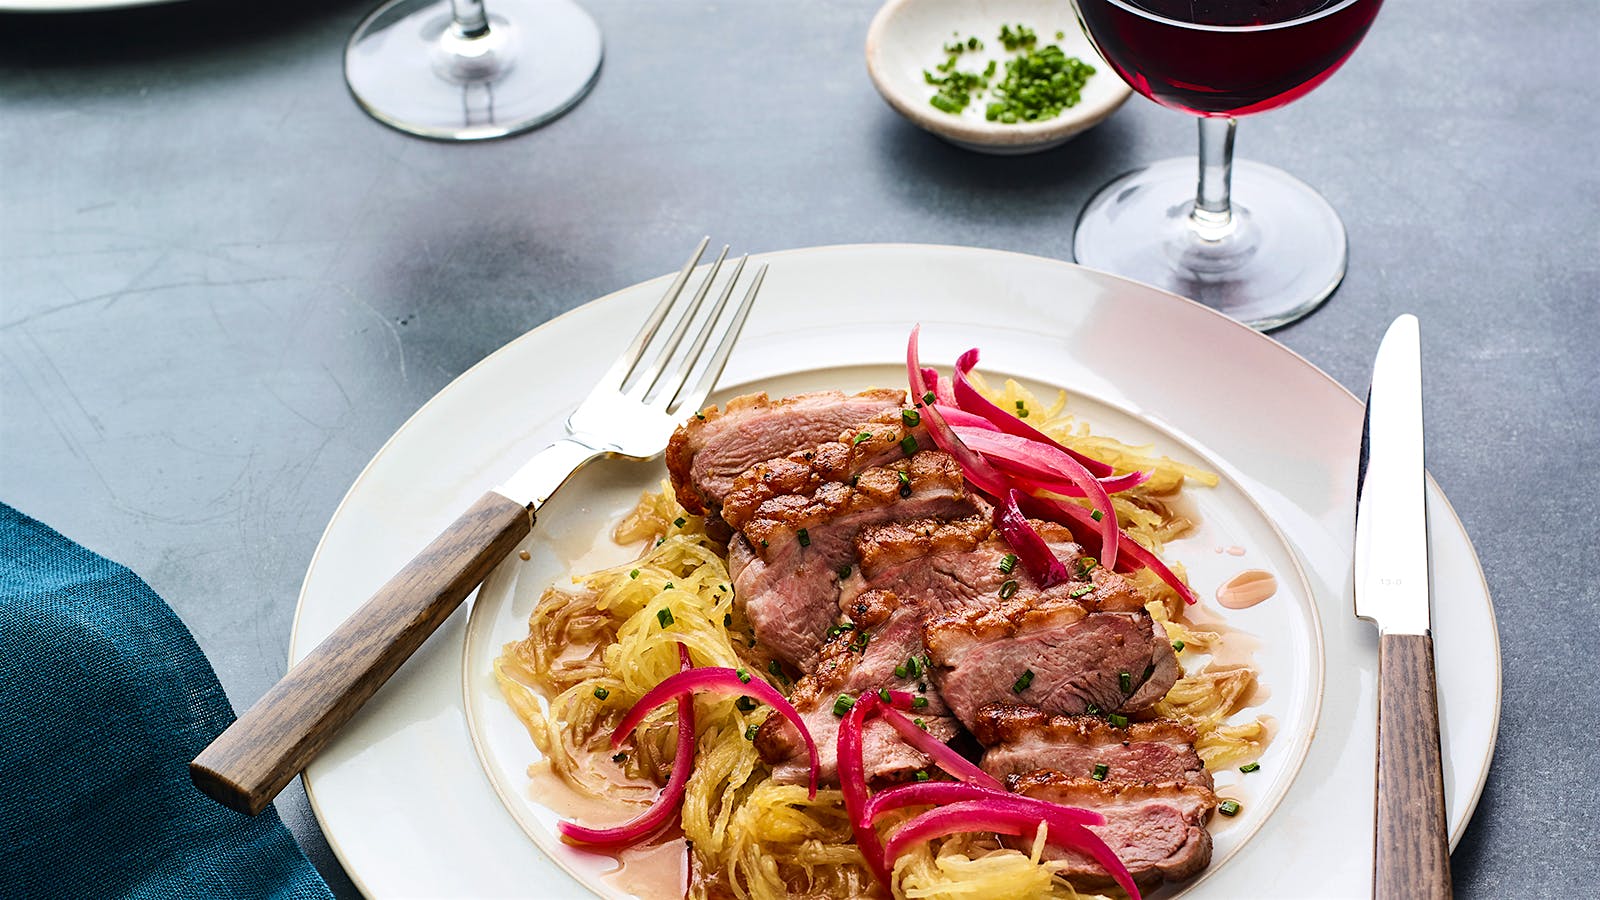 Perfect Match Recipe: Seared Duck Breast with Spaghetti Squash, Onion Syrup, Pickled Onions & Chives